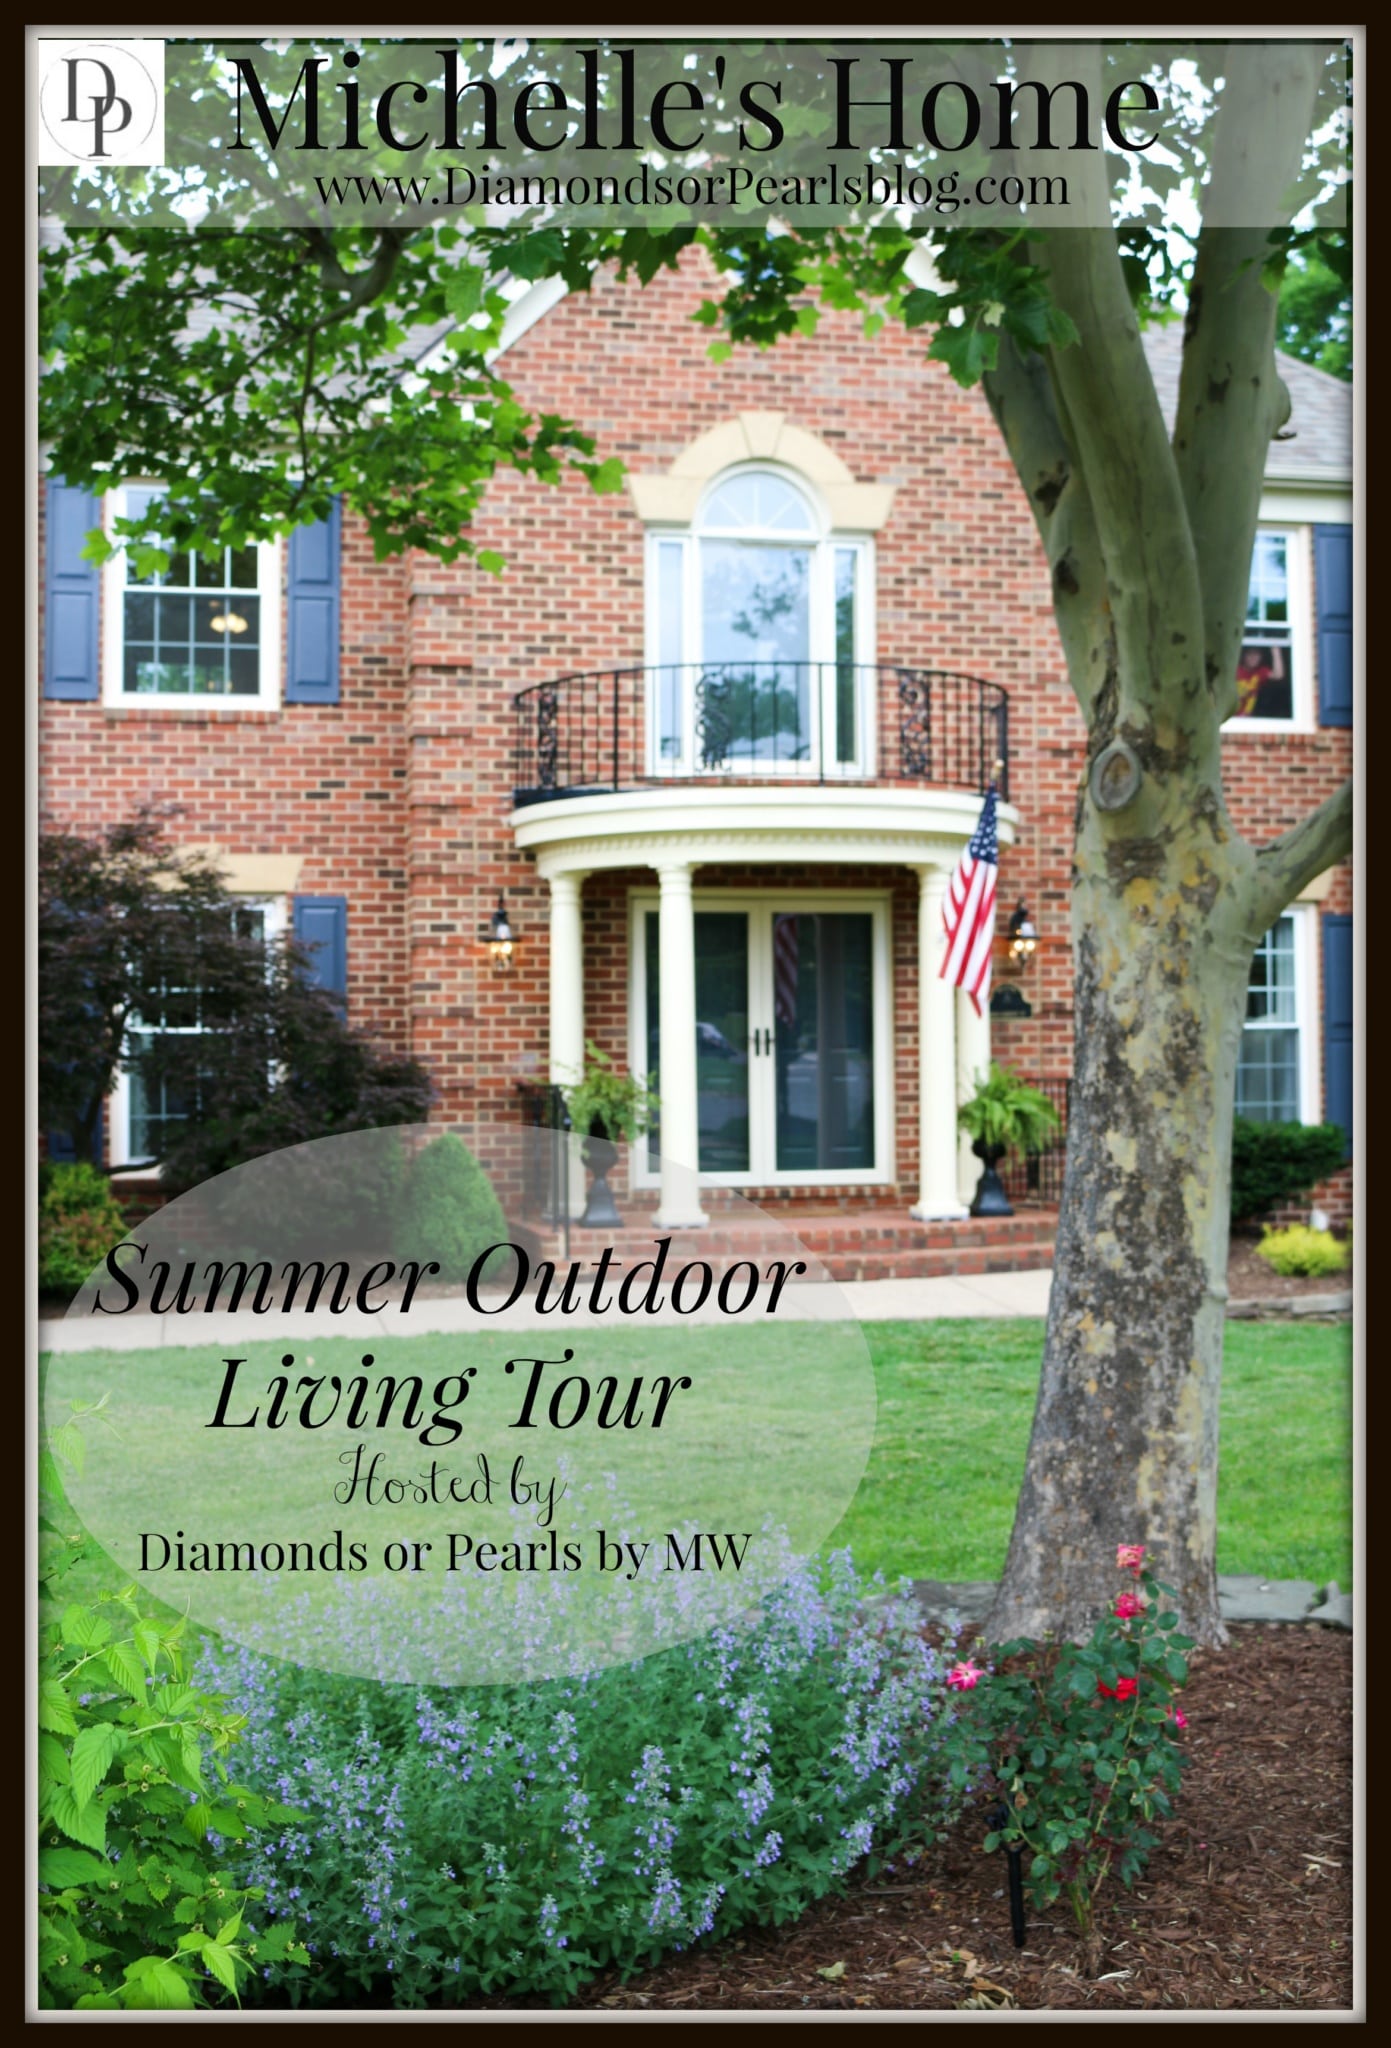 Diamonds or Pearls “Summer Outdoor Living” Tour Round-Up